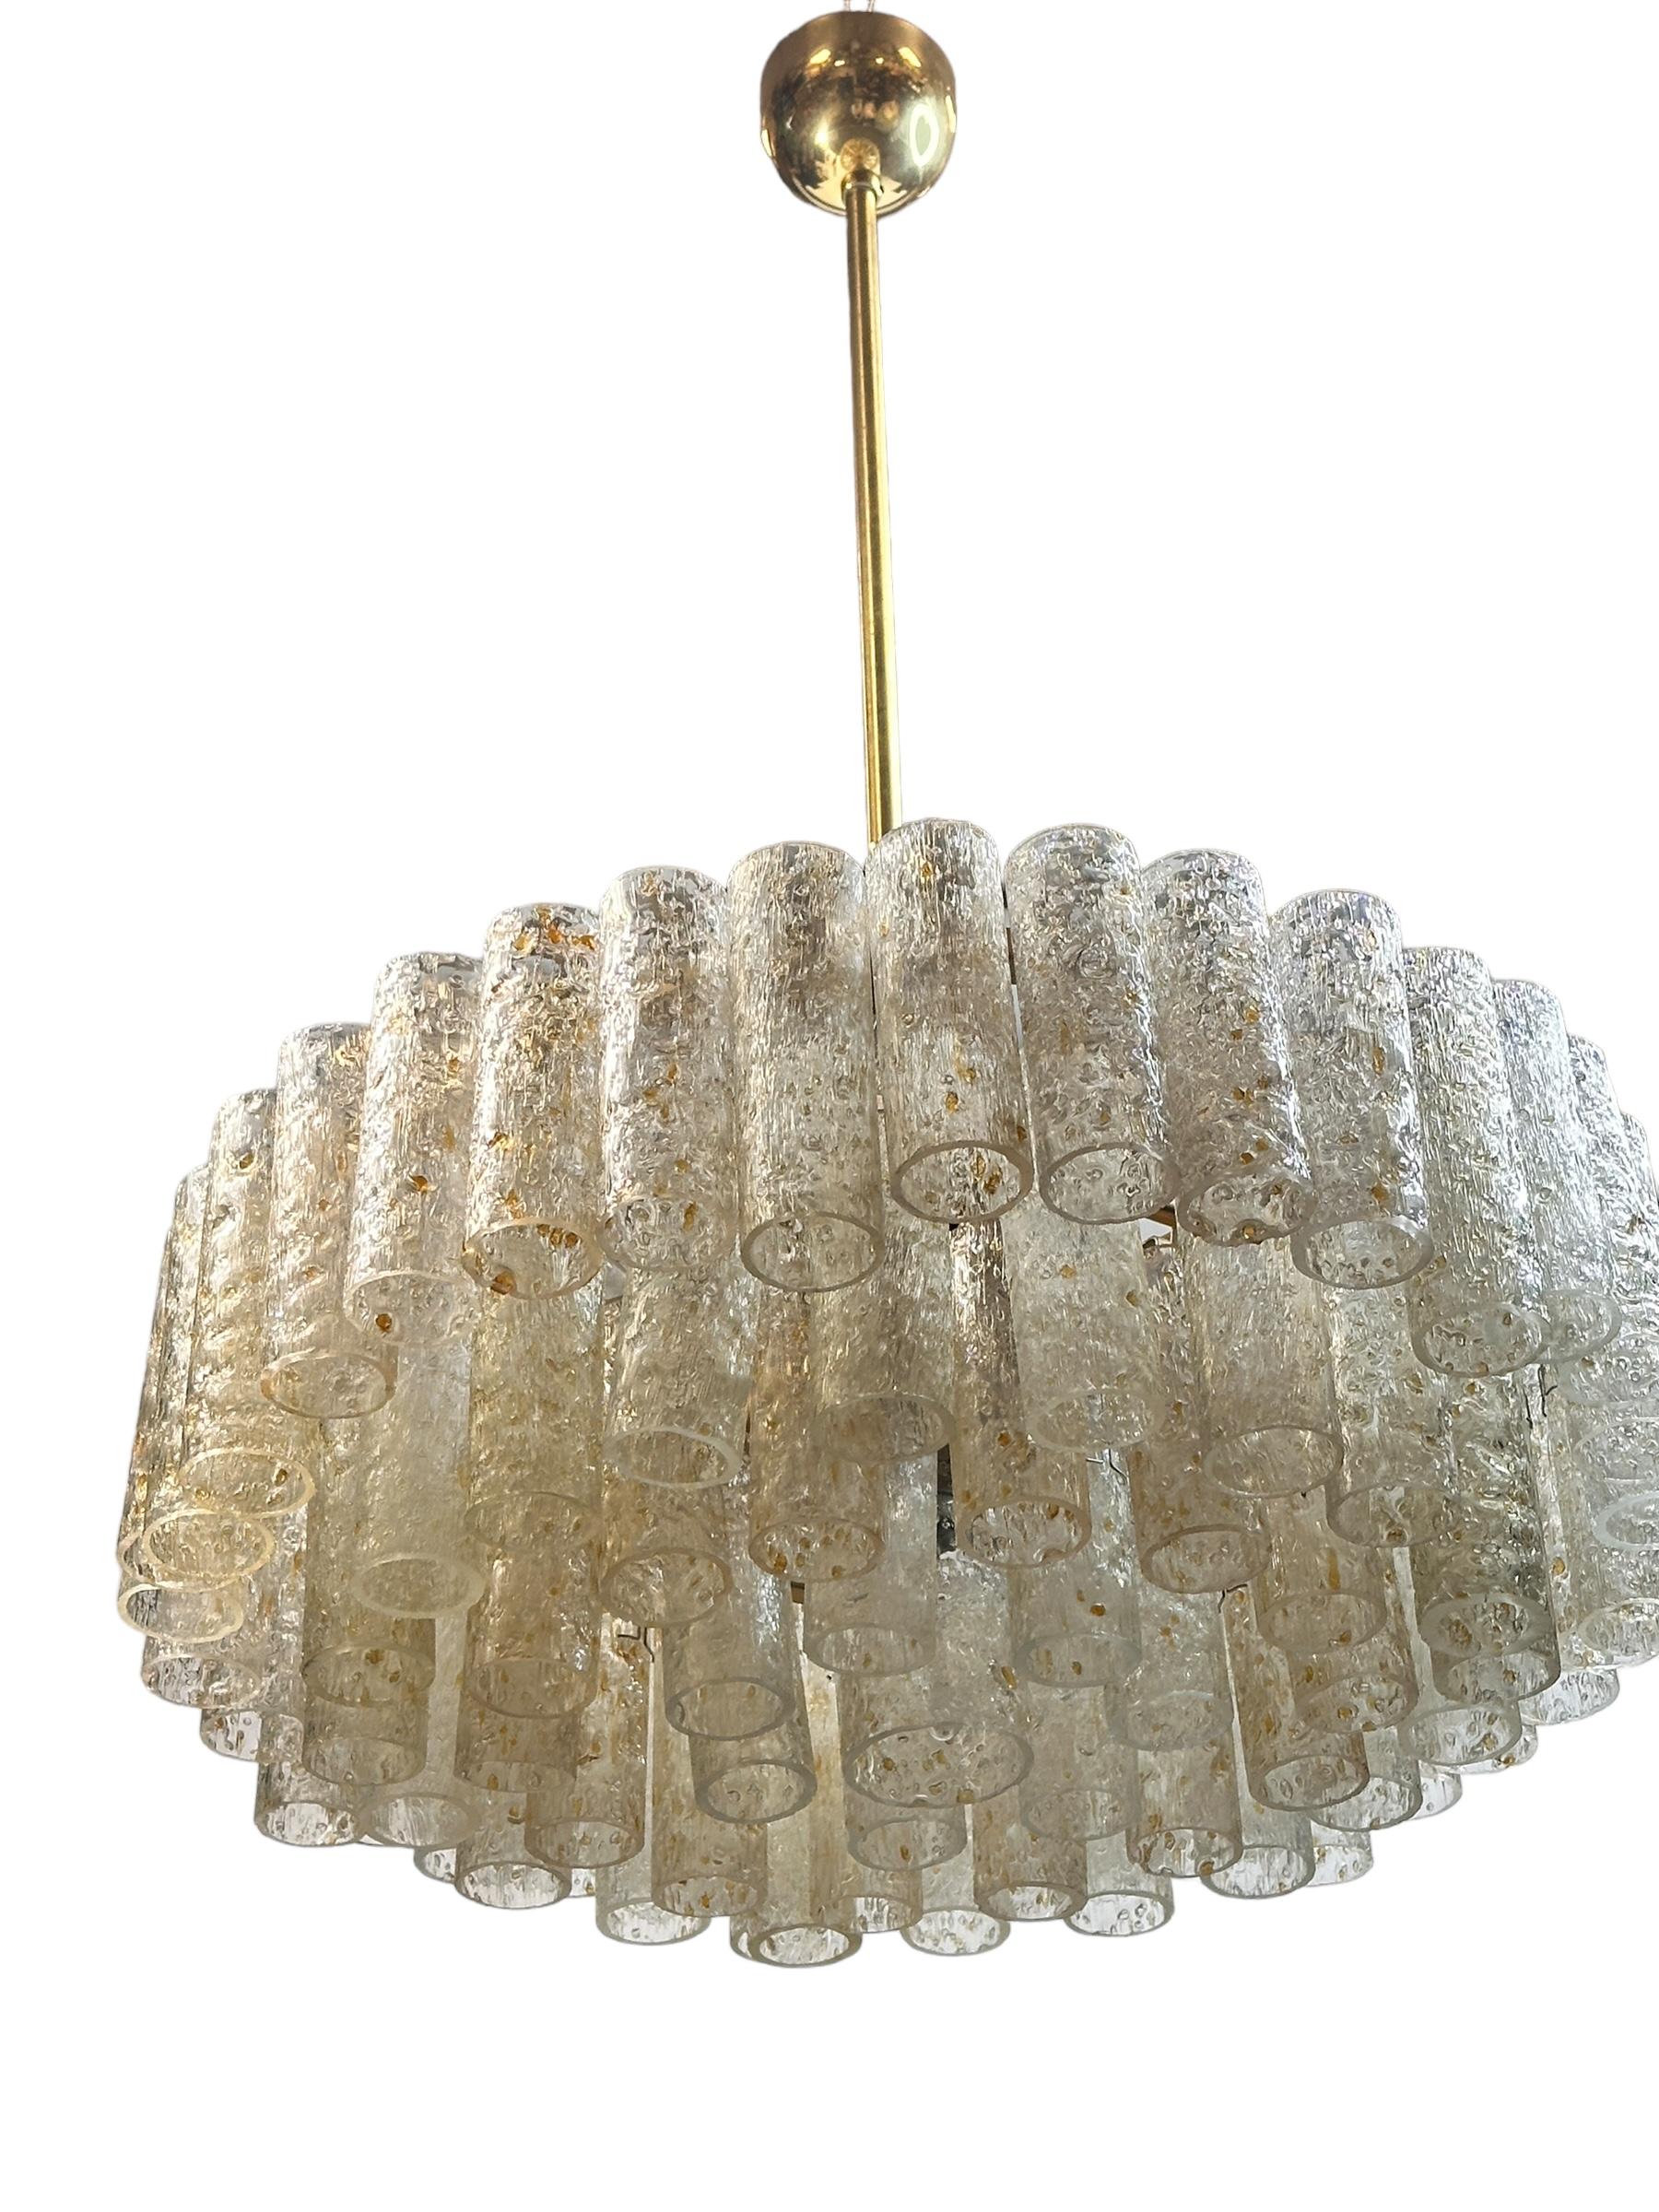 Mid-20th Century Large Five - Tier Glass Tube Chandelier by Doria Leuchten, Germany, 1960s For Sale